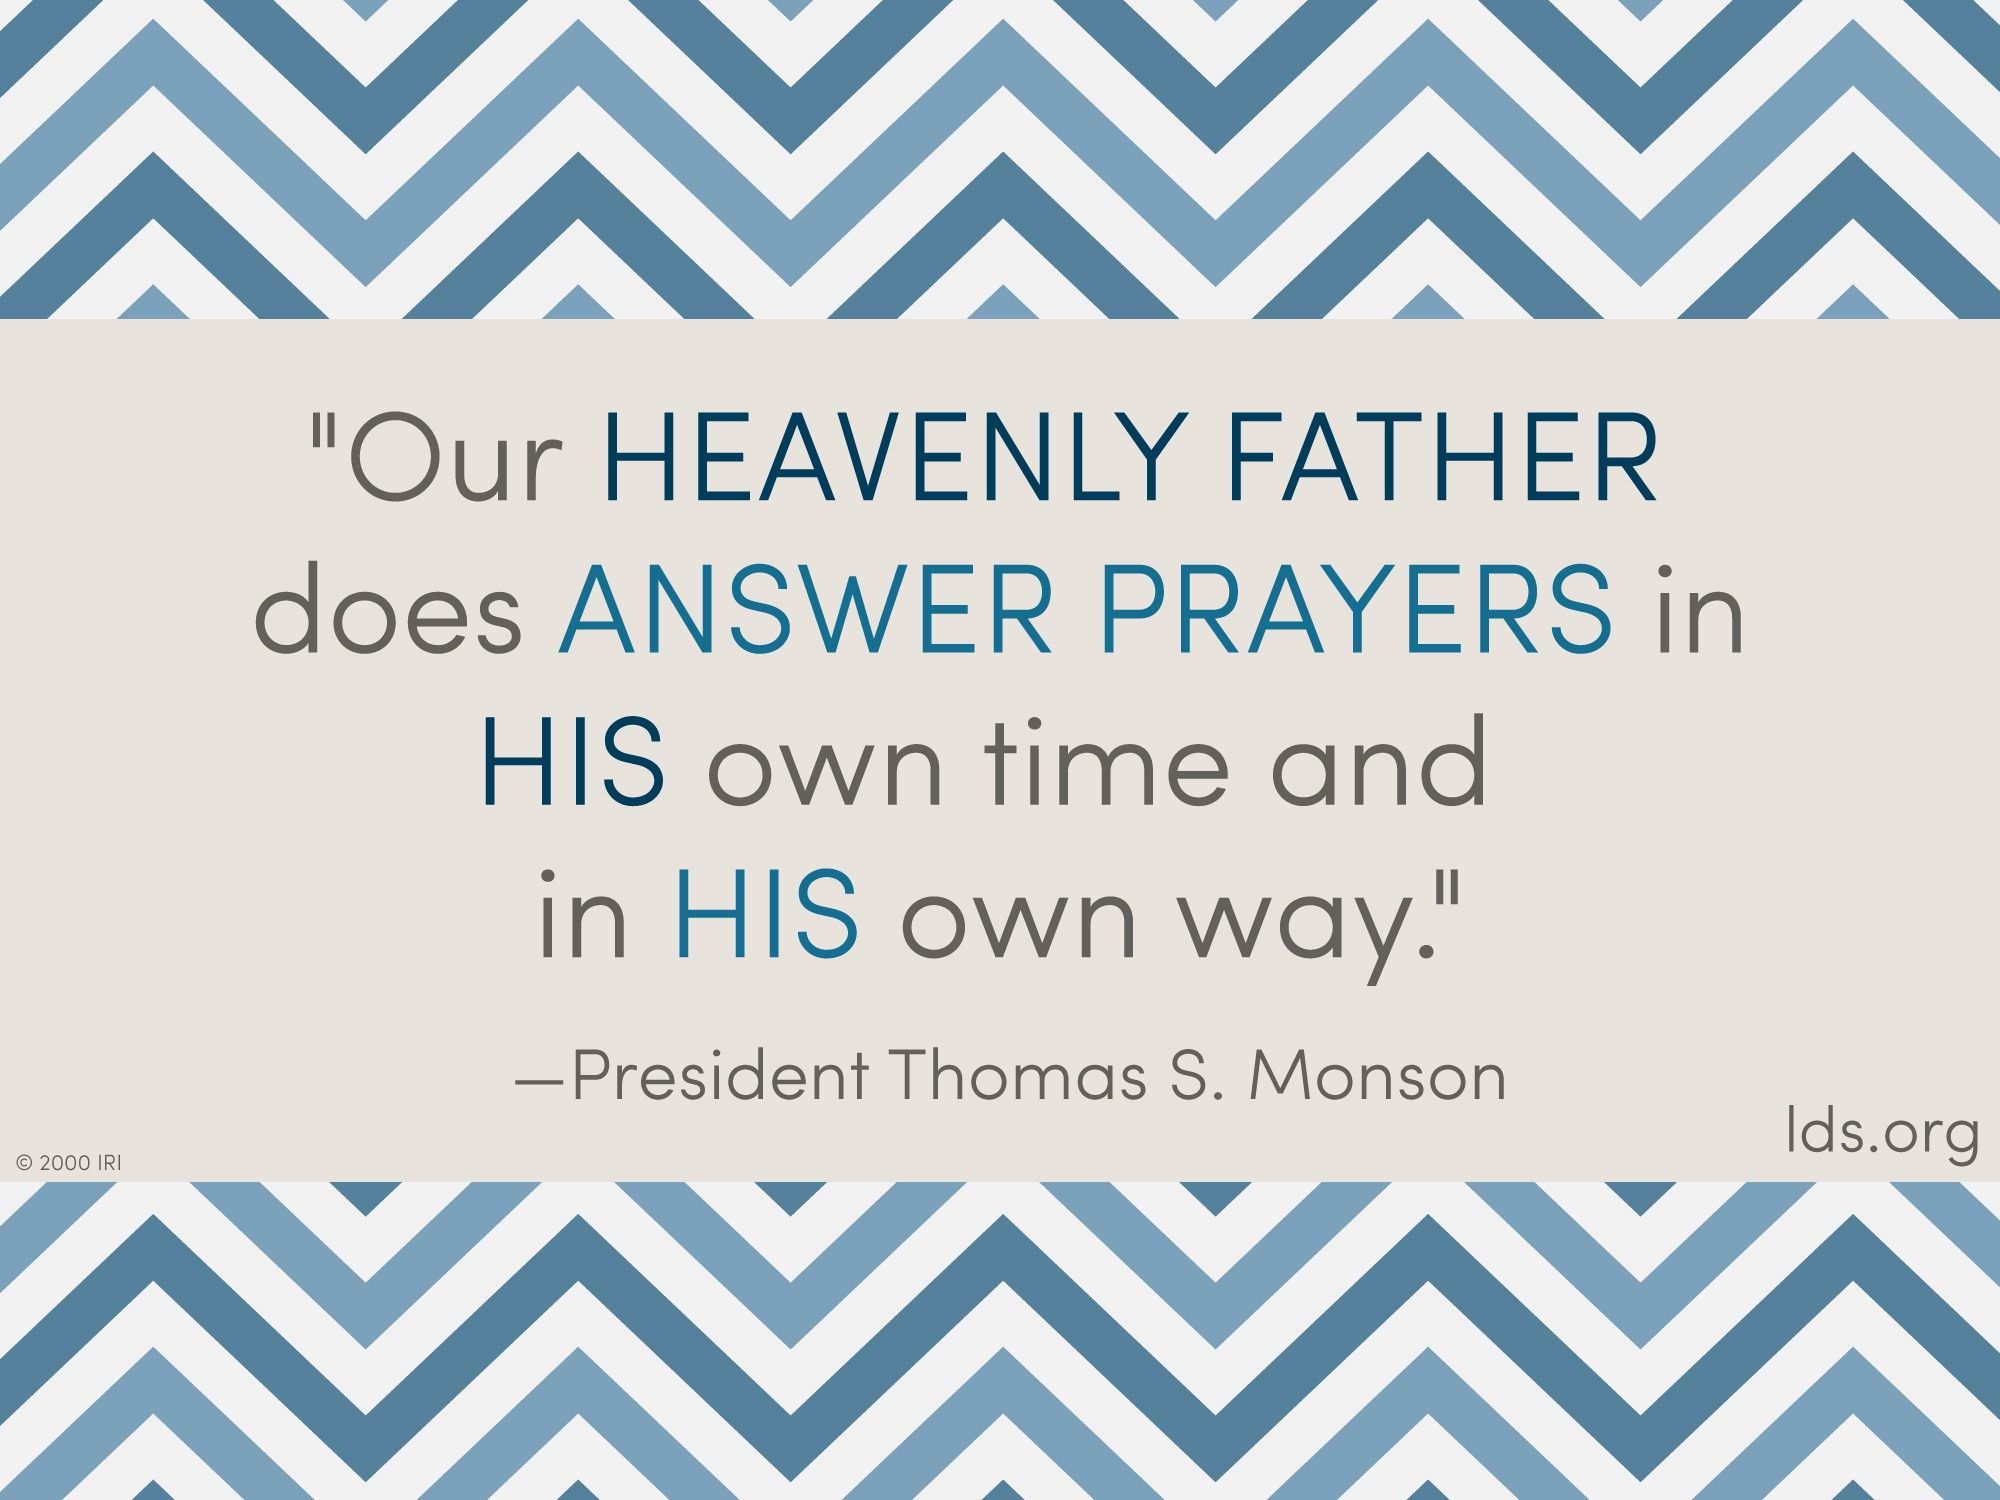 “Our Heavenly Father does answer prayers in His own time and in His own way.”—President Thomas S. Monson, “Special Witnesses of Christ”